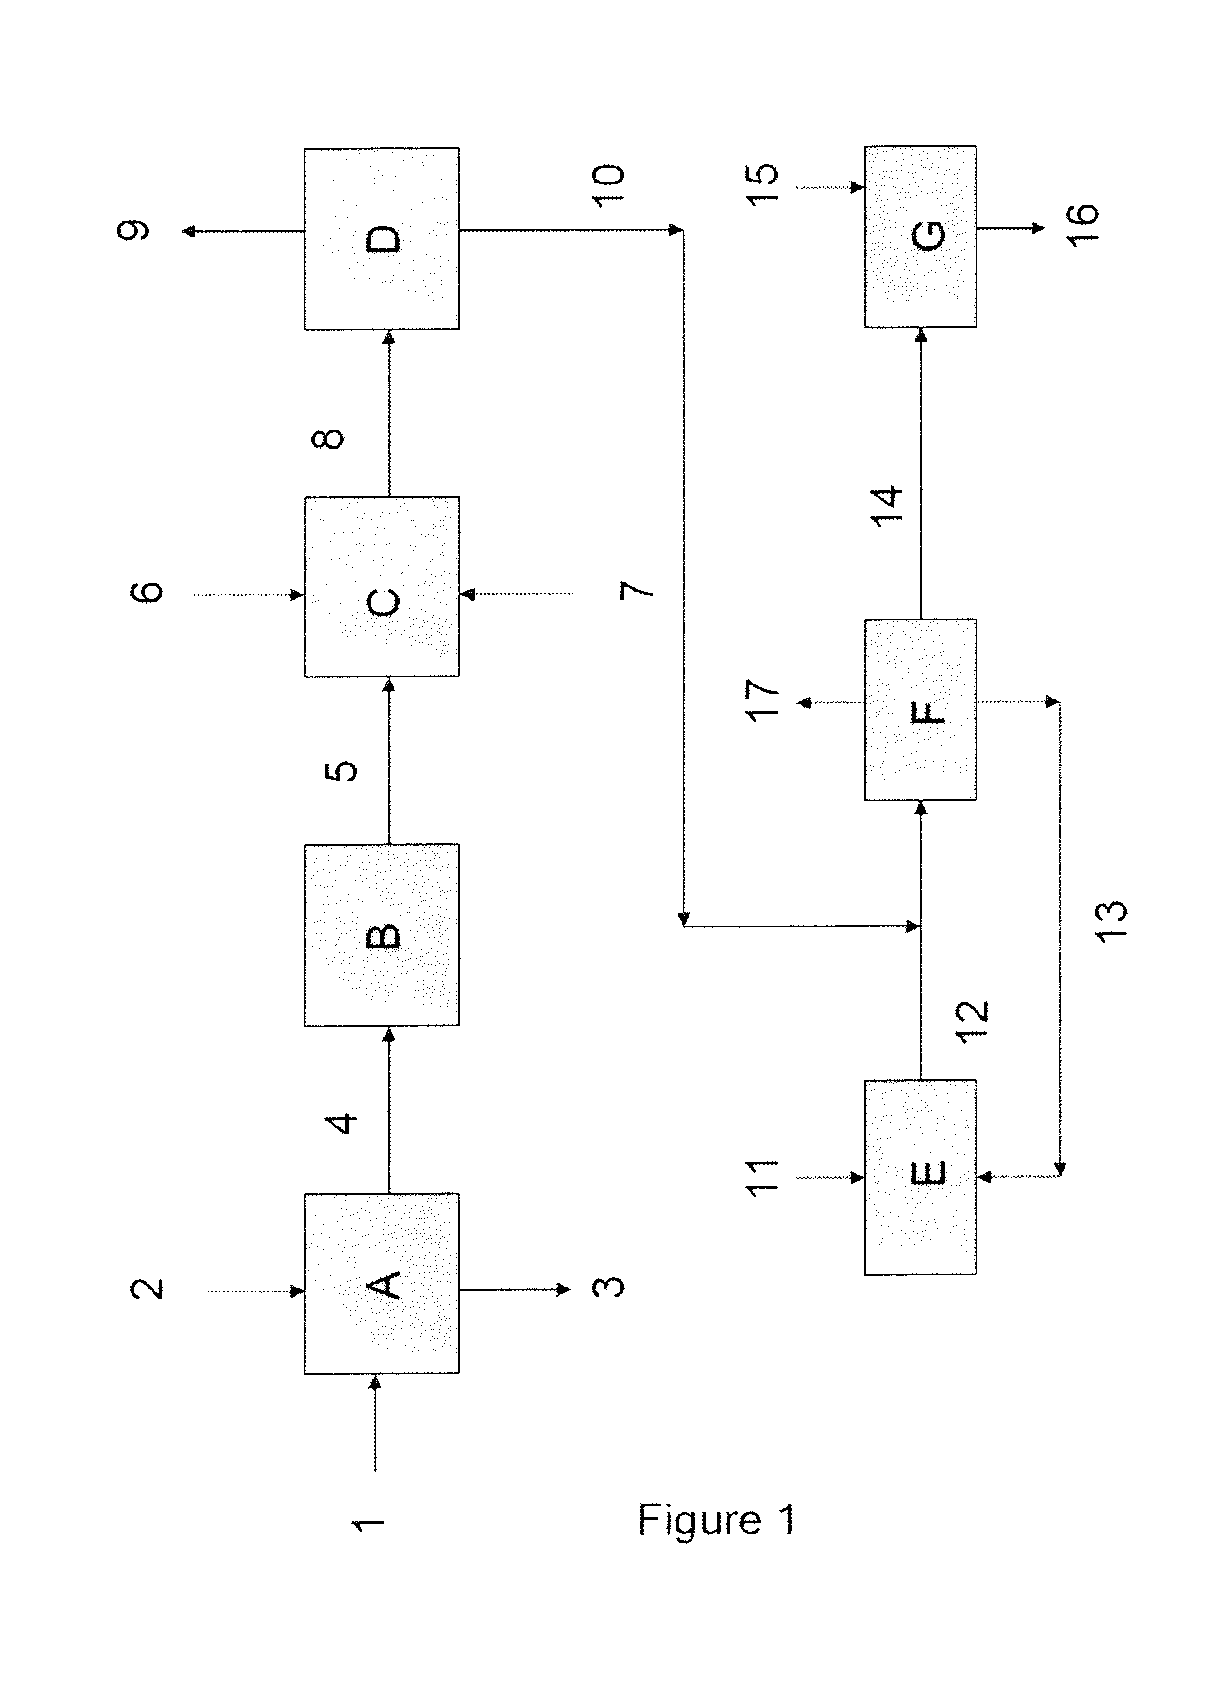 Process for the production of reactive composition particles based on sodium carbonate and reactive composition particles